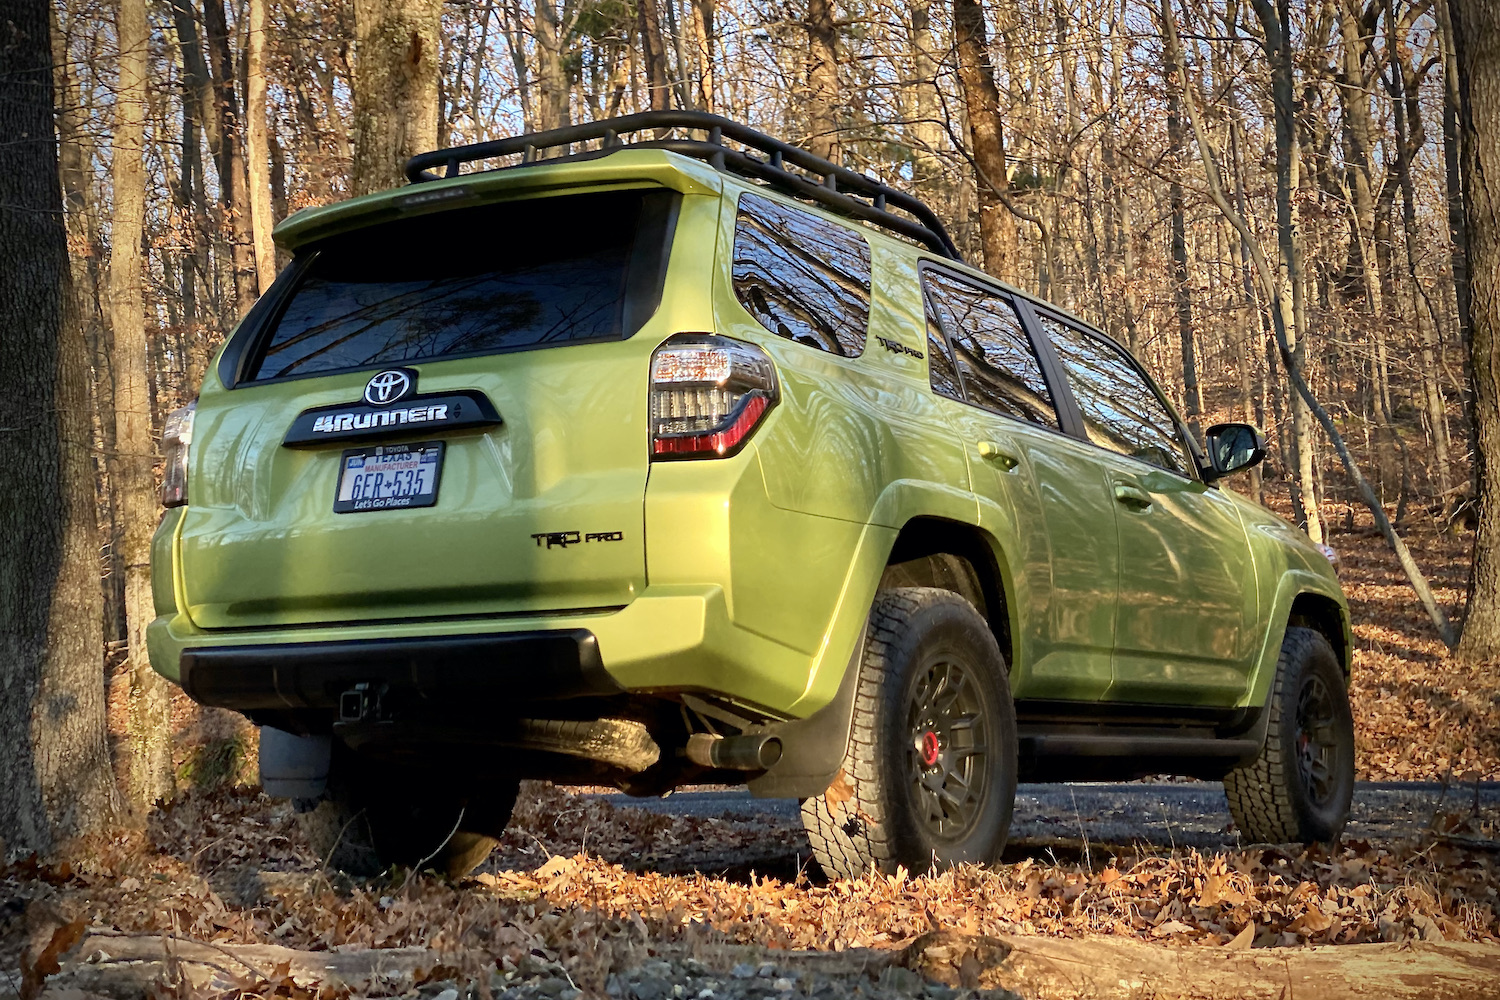 Rear end angle of Toyota 4Runner TRD Pro from passenger's side with leaves.